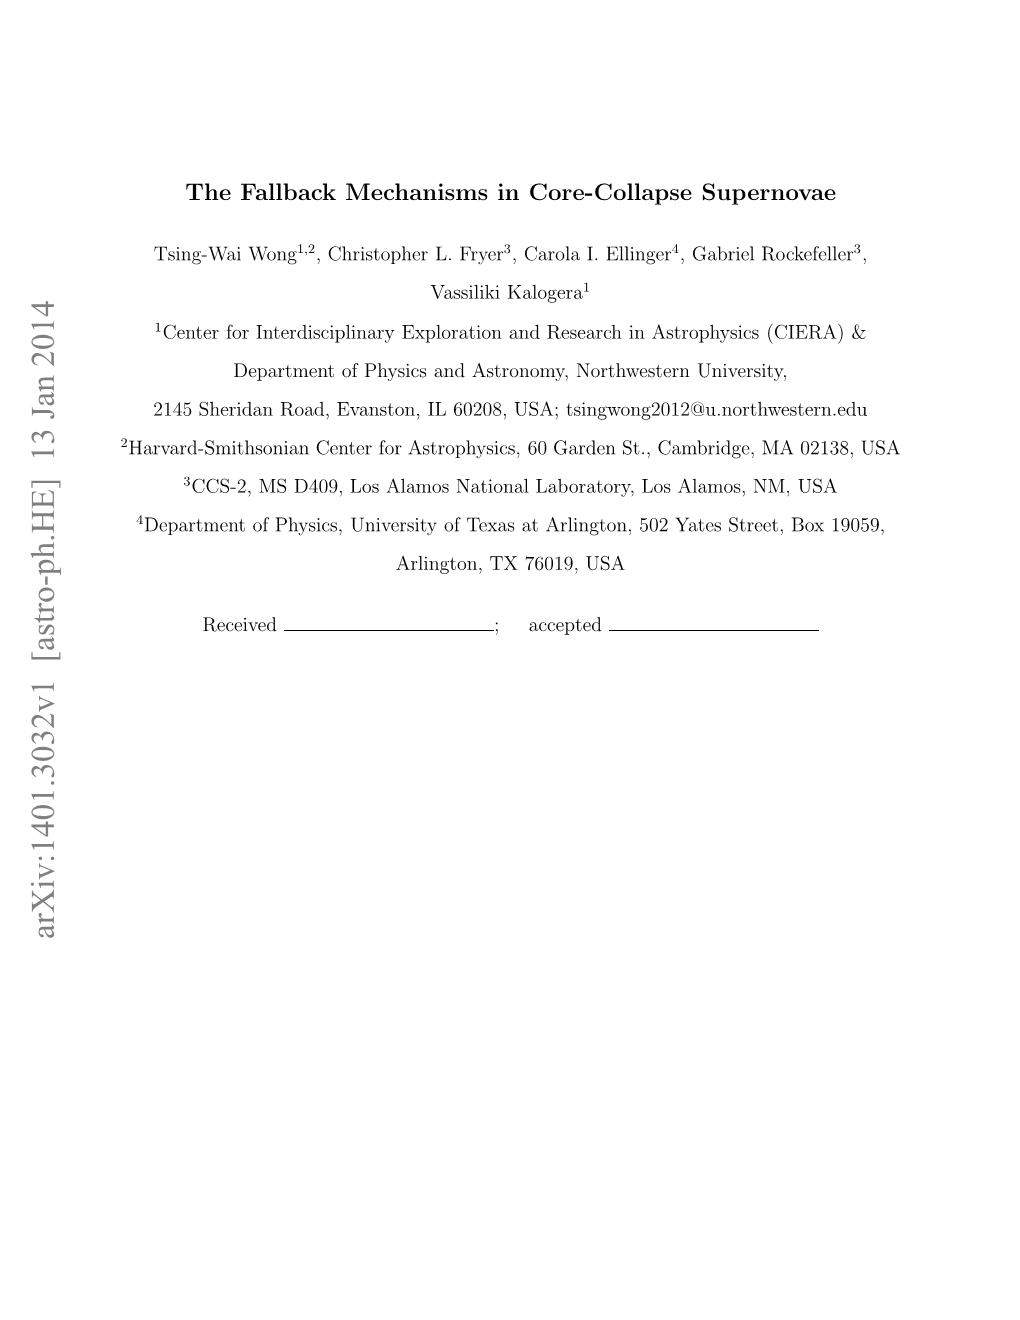 The Fallback Mechanisms in Core-Collapse Supernovae